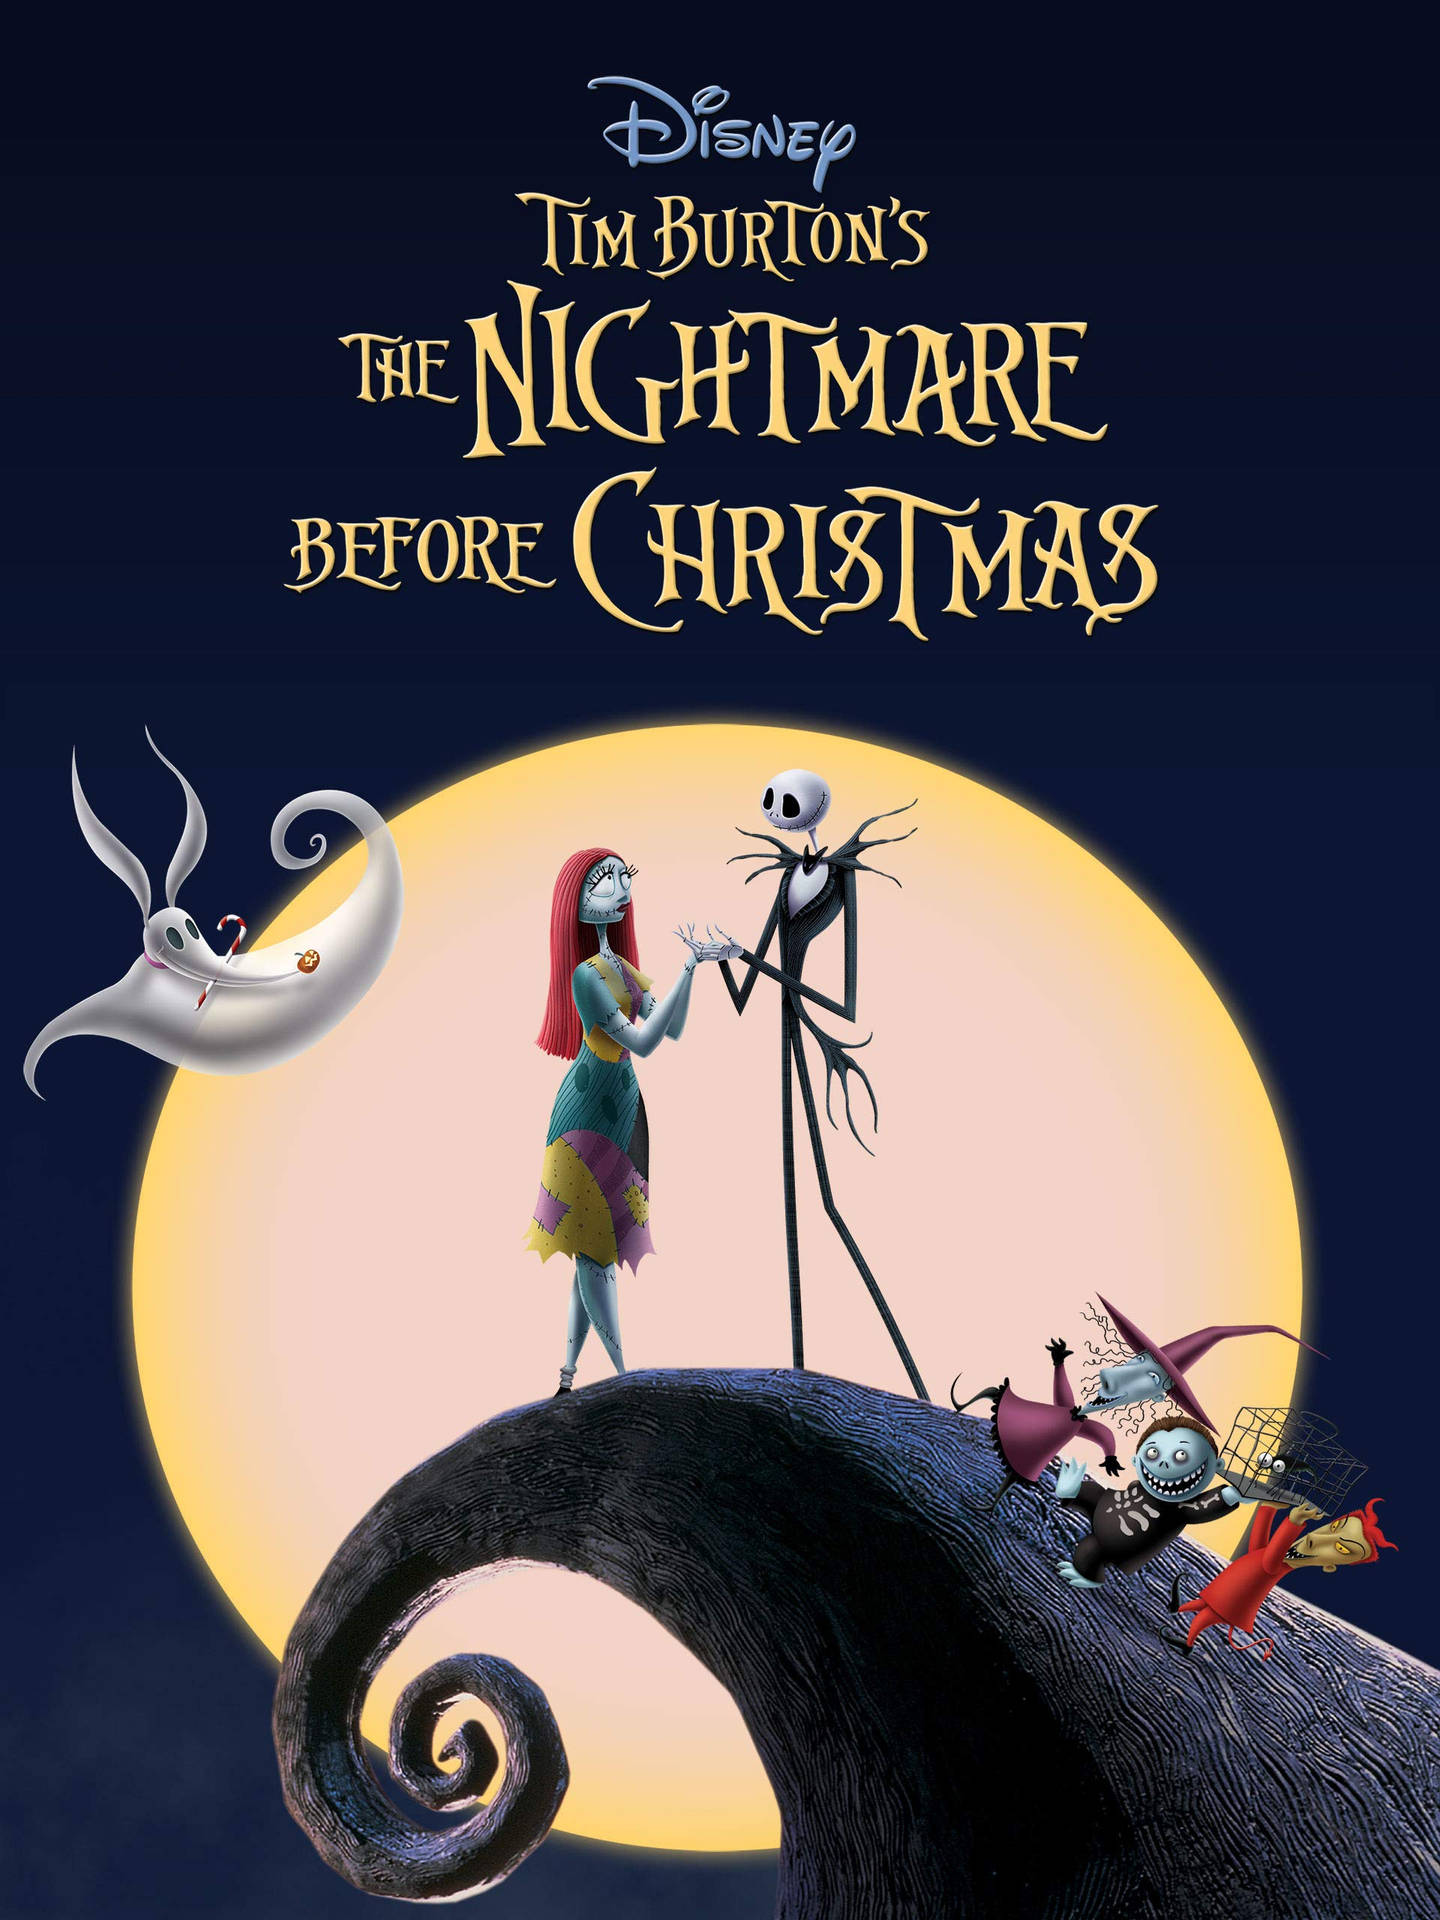 The Nightmare Before Christmas Movie Poster Wallpaper